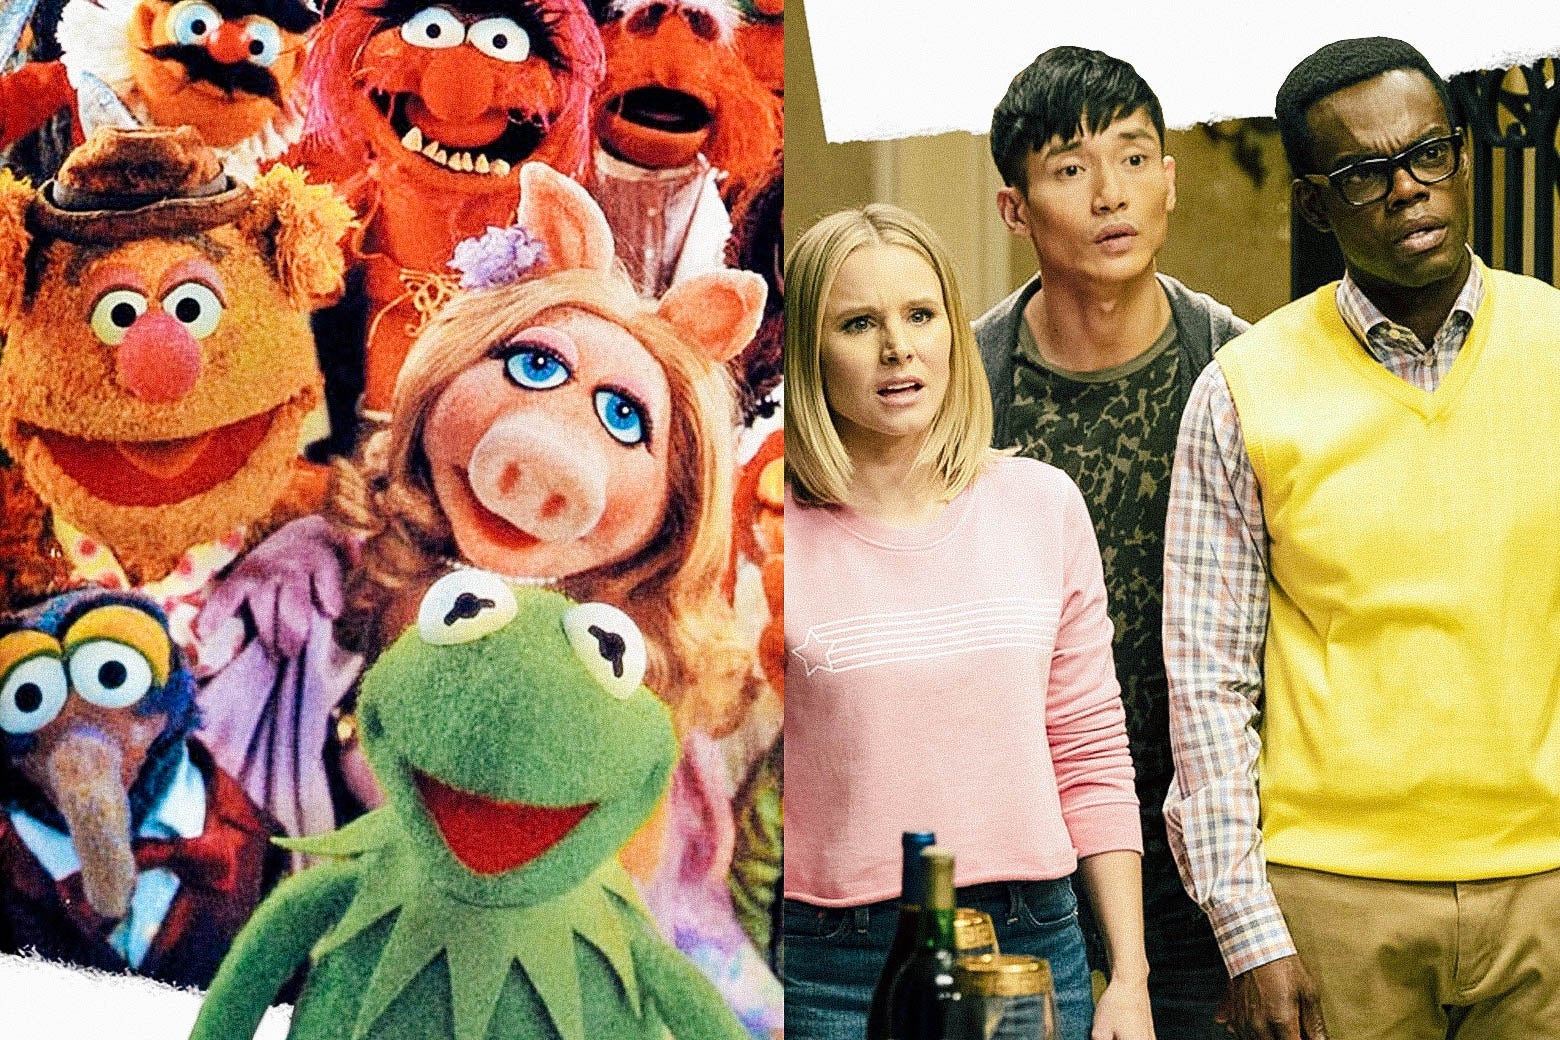 The Muppet Show and The Good Place.